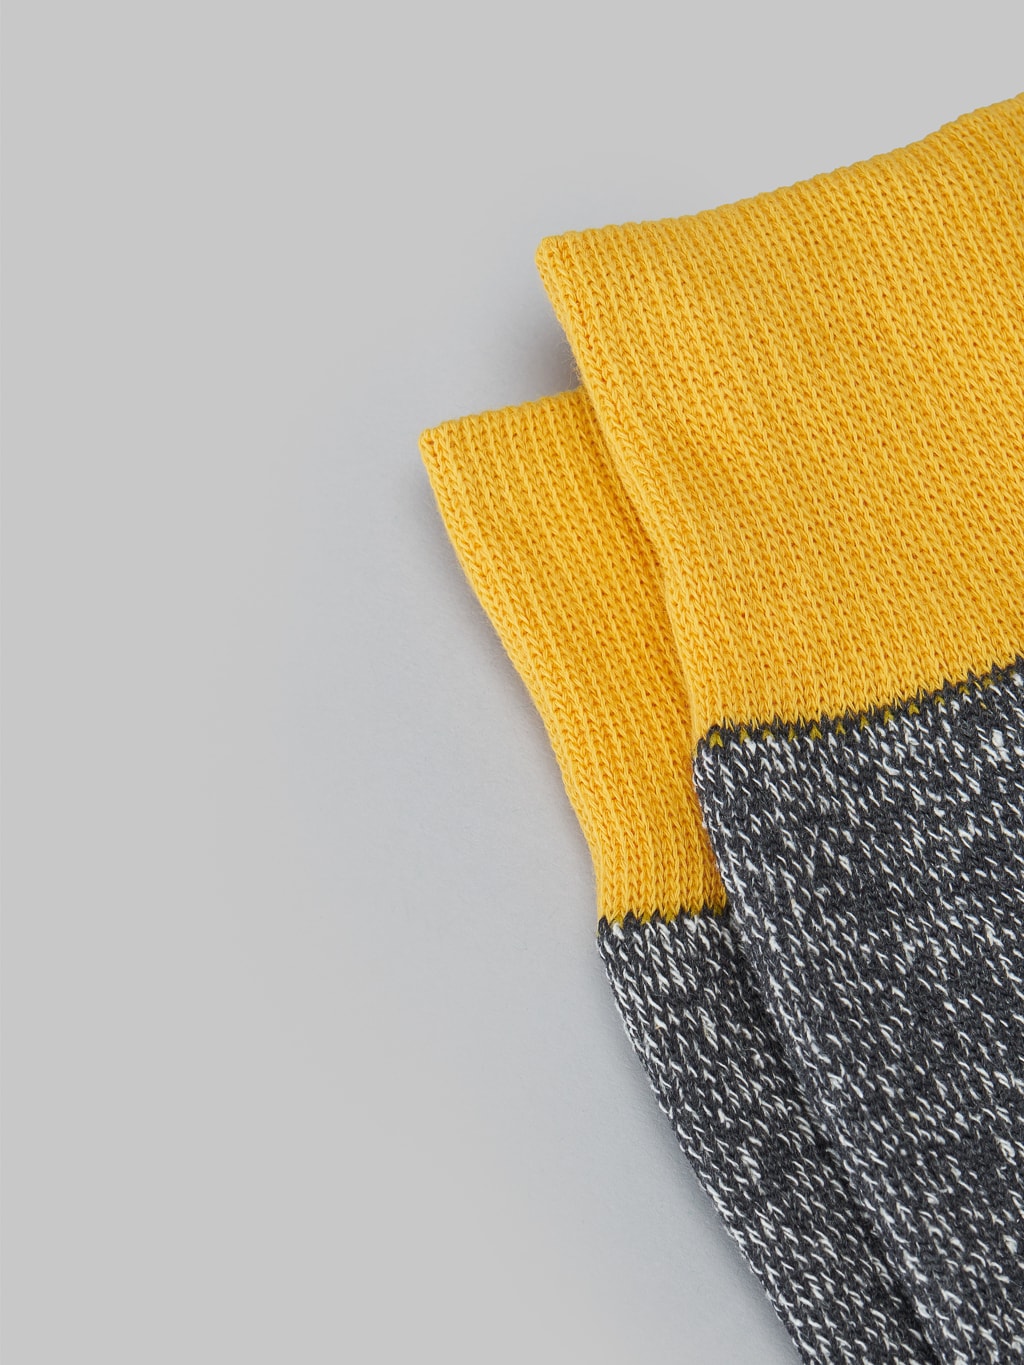 ROTOTO Double Face Crew Socks "Silk & Cotton" Yellow/Charcoal